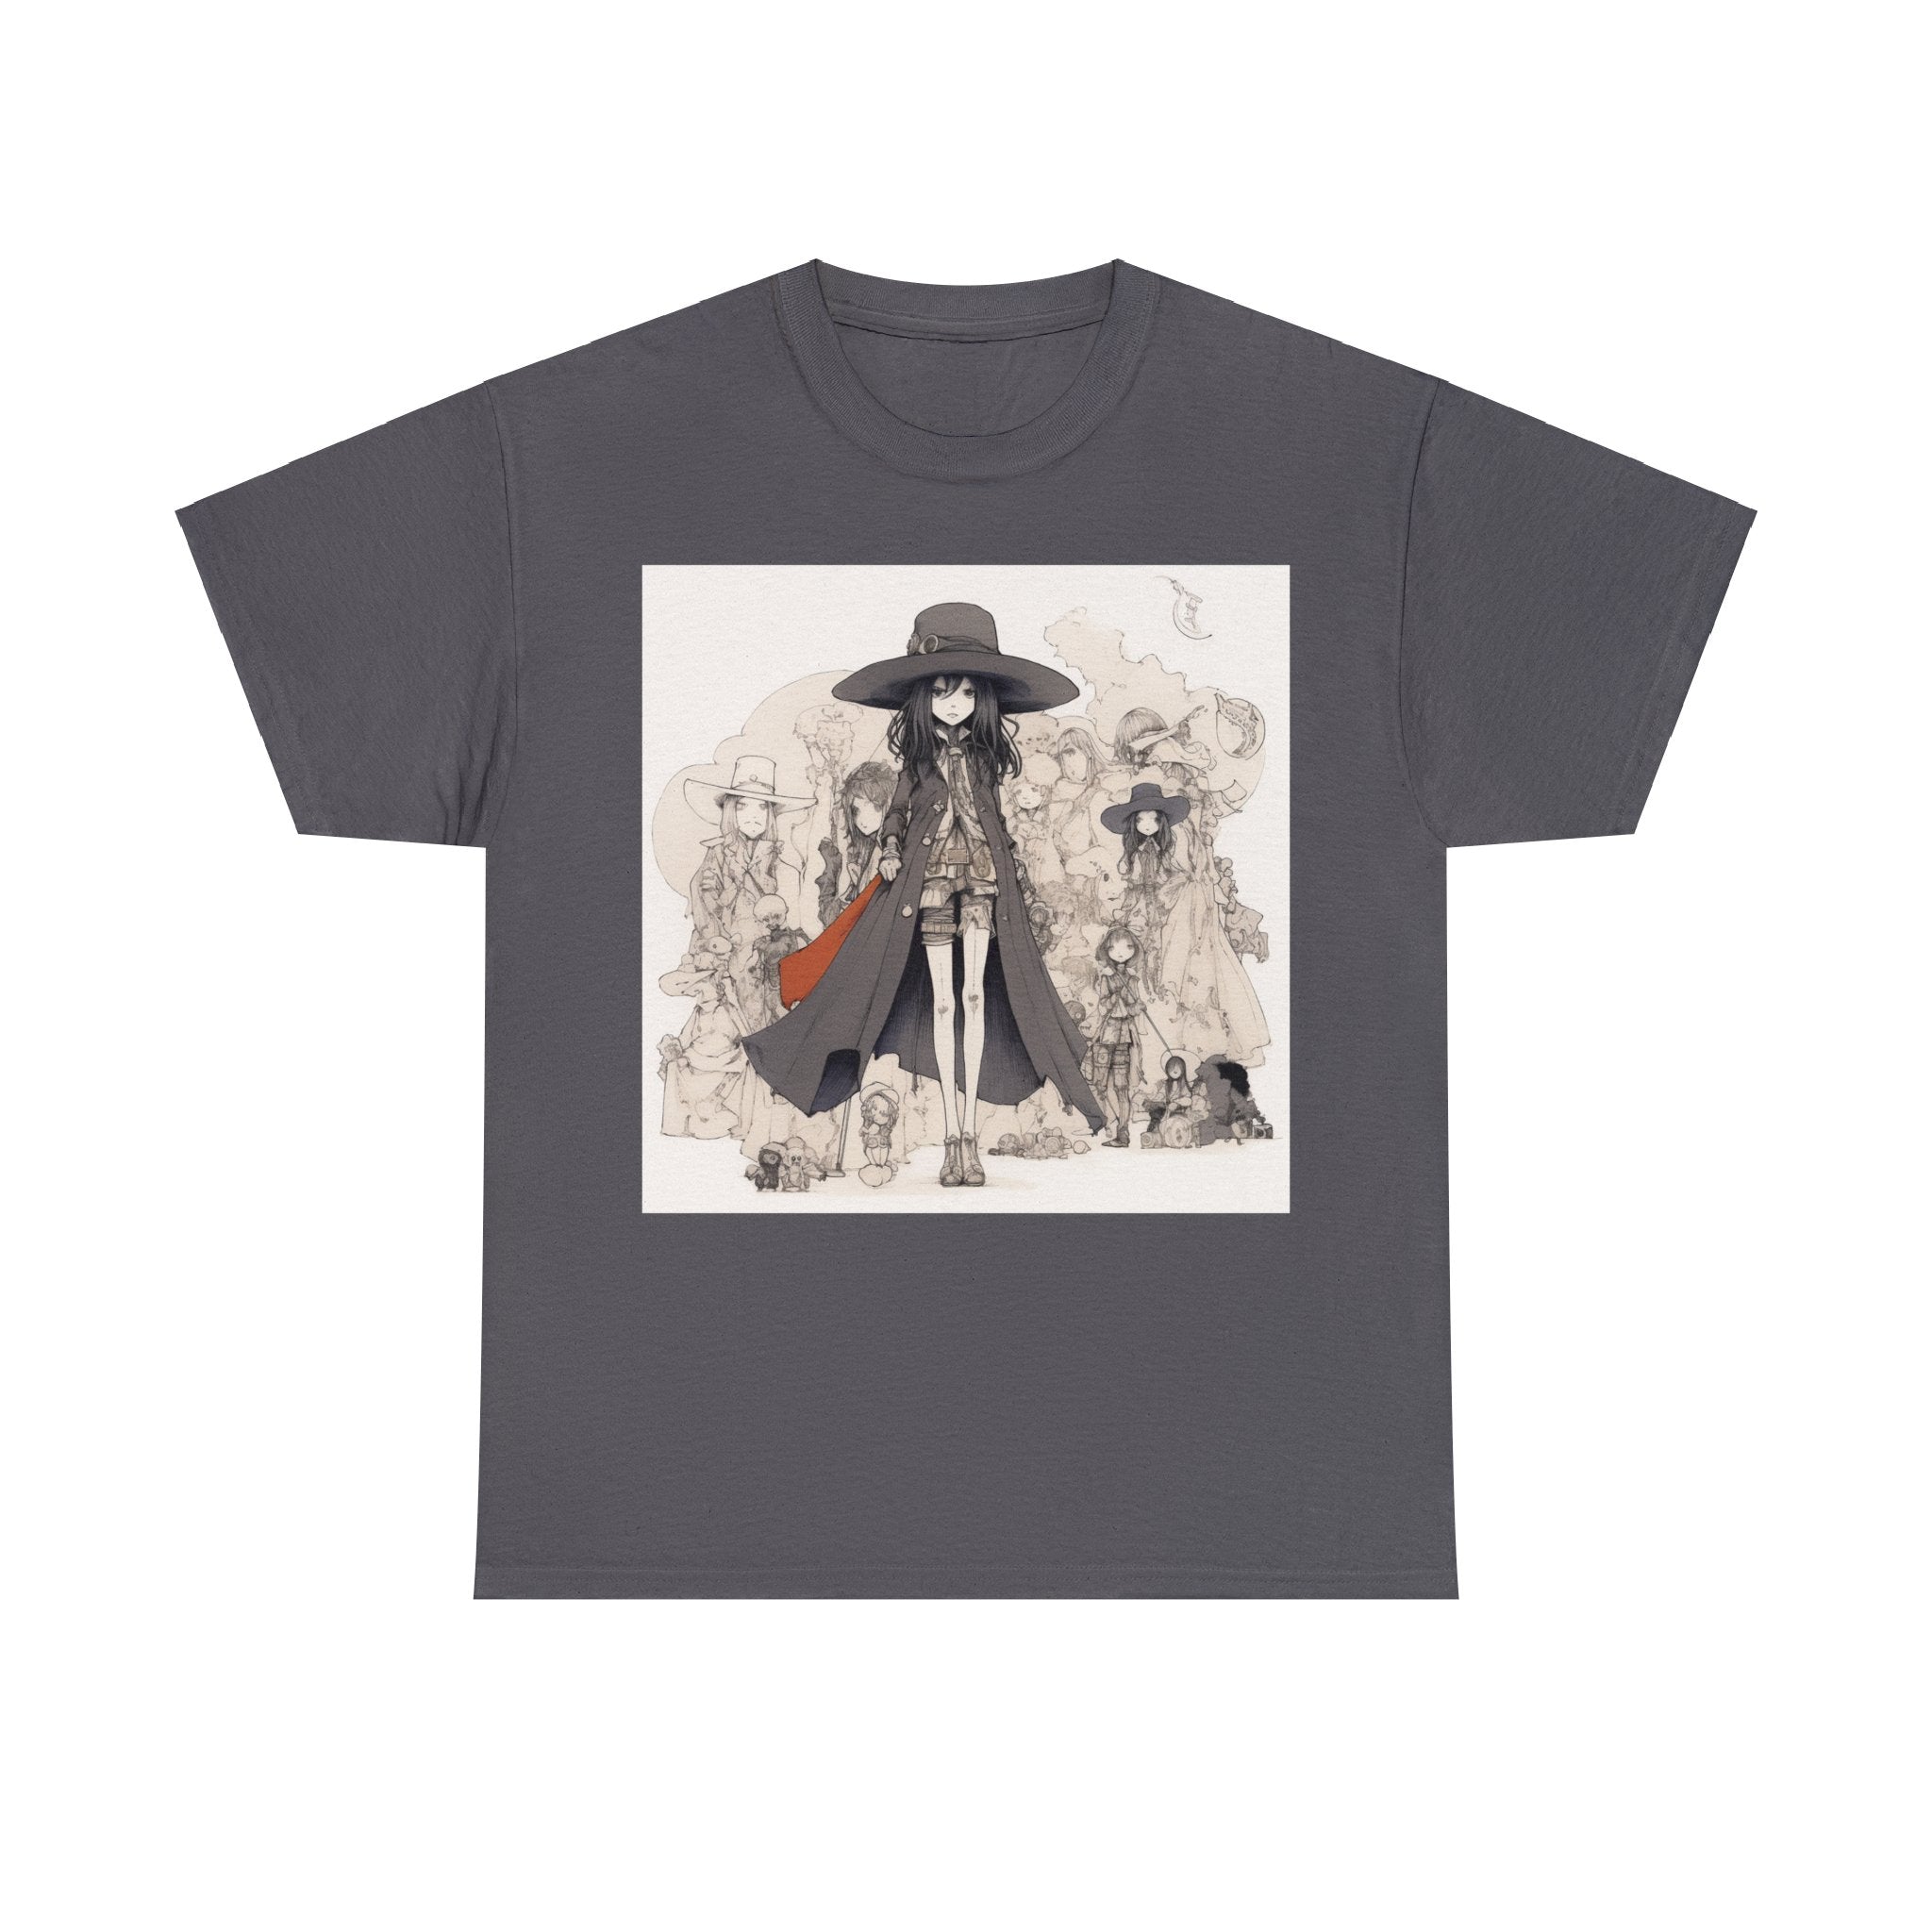 Adorable Anime Girl Vampire Killer Unisex Heavy Cotton Tee - Unique Anime-Inspired Fashion for Fans and Enthusiasts